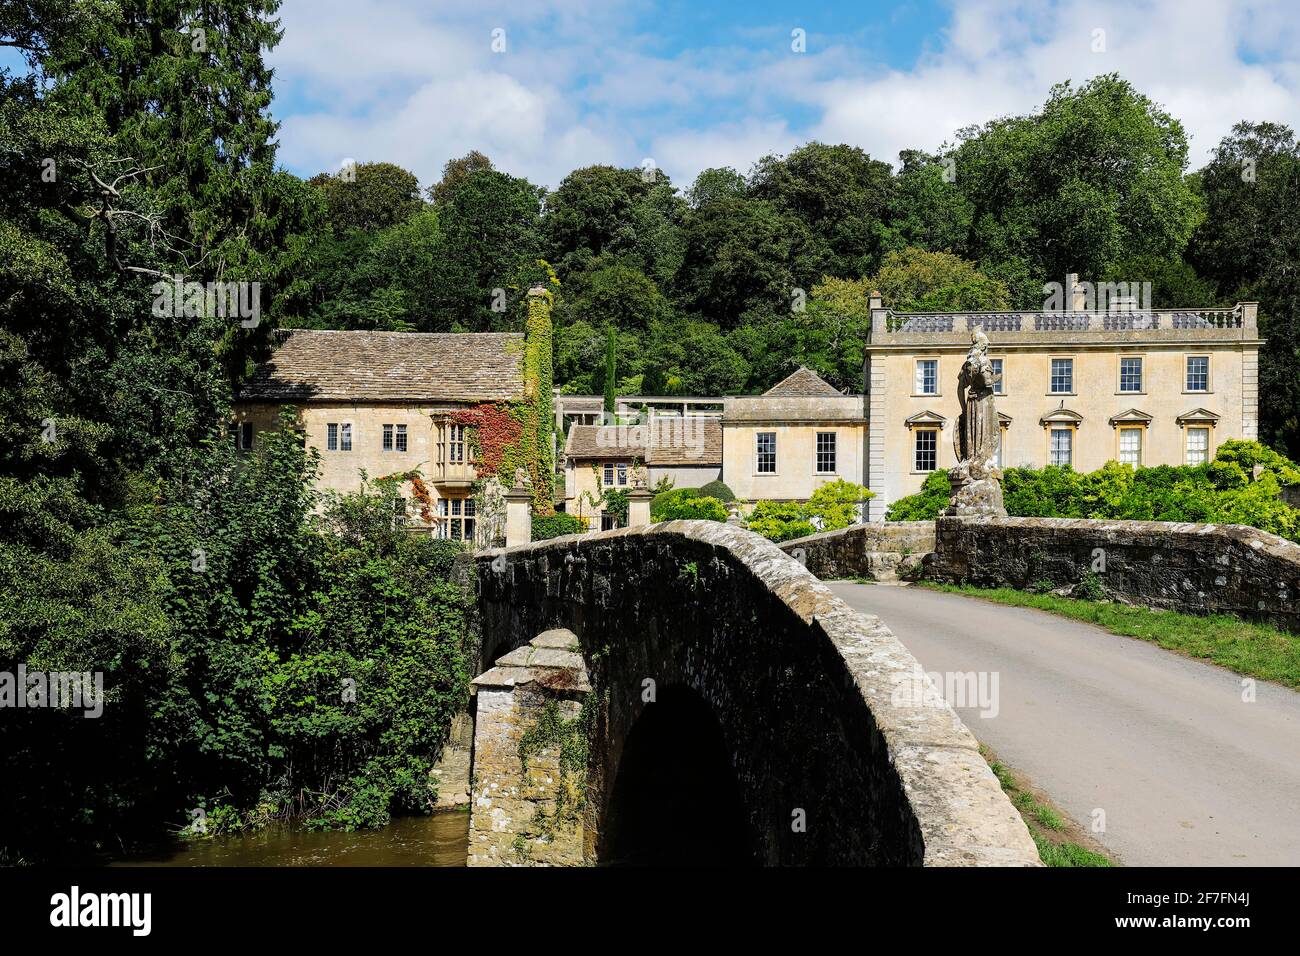 Iford Manor by the River Frome, this 18th-19th century version was created with popular gardens, Iford, Bradford-on-Avon, Wiltshire, England Stock Photo